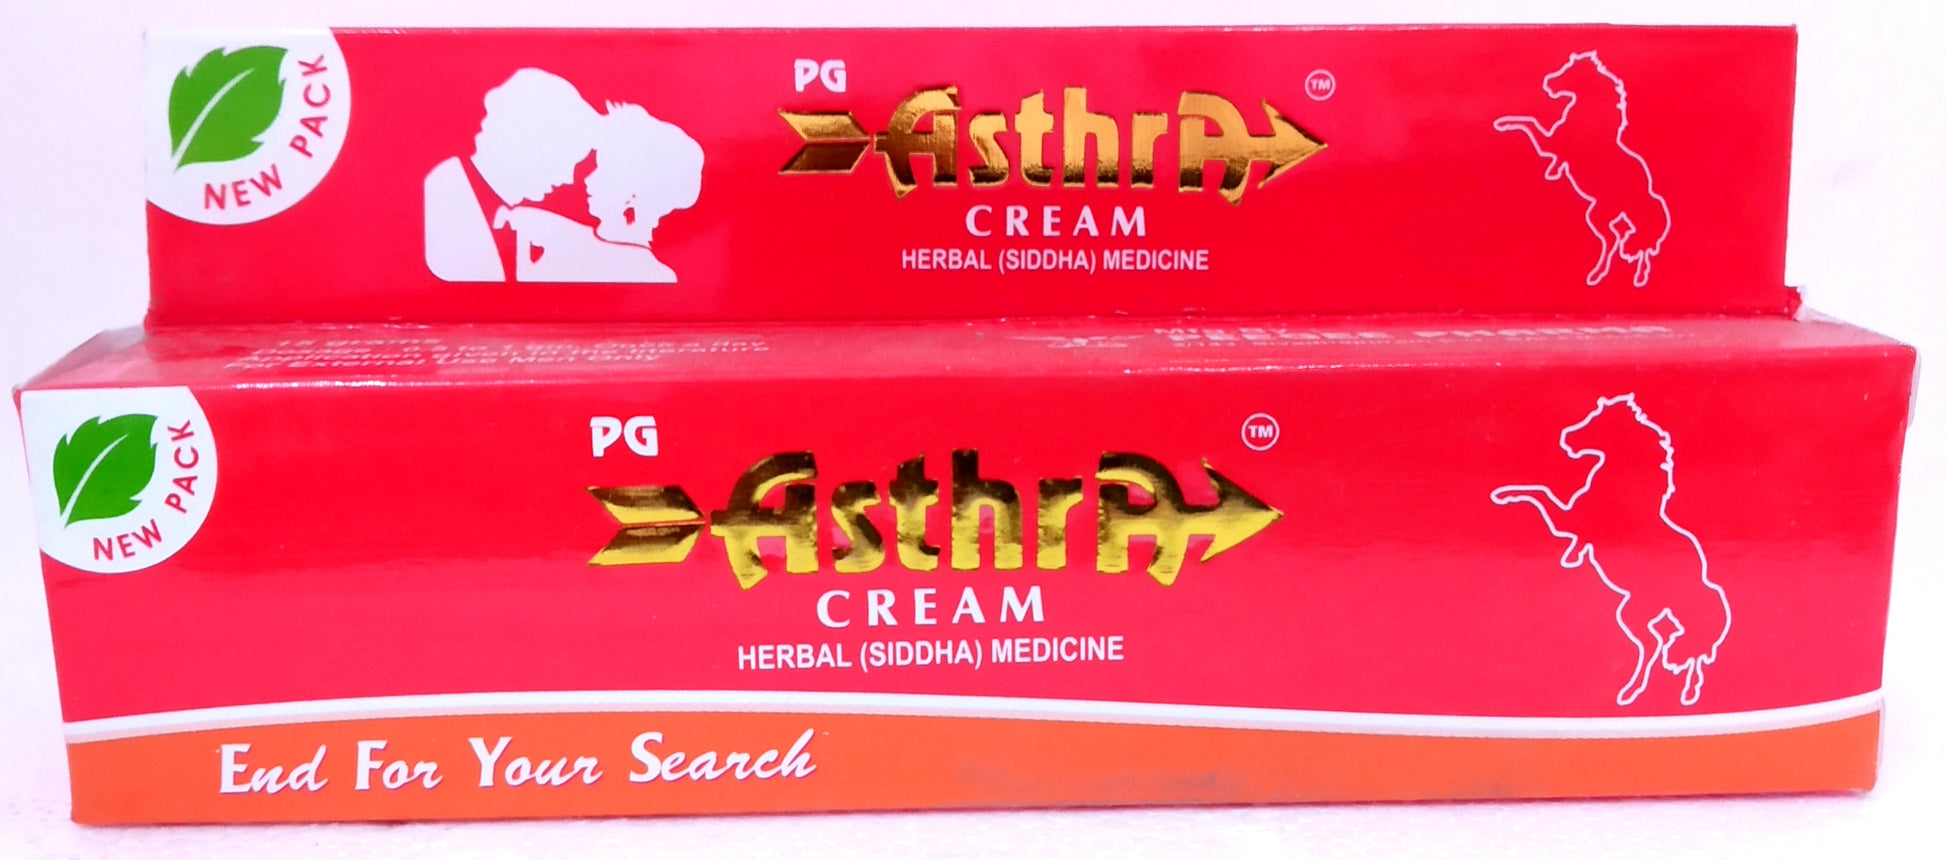 Shop Asthra Cream 15gm at price 112.00 from Peegee Online - Ayush Care